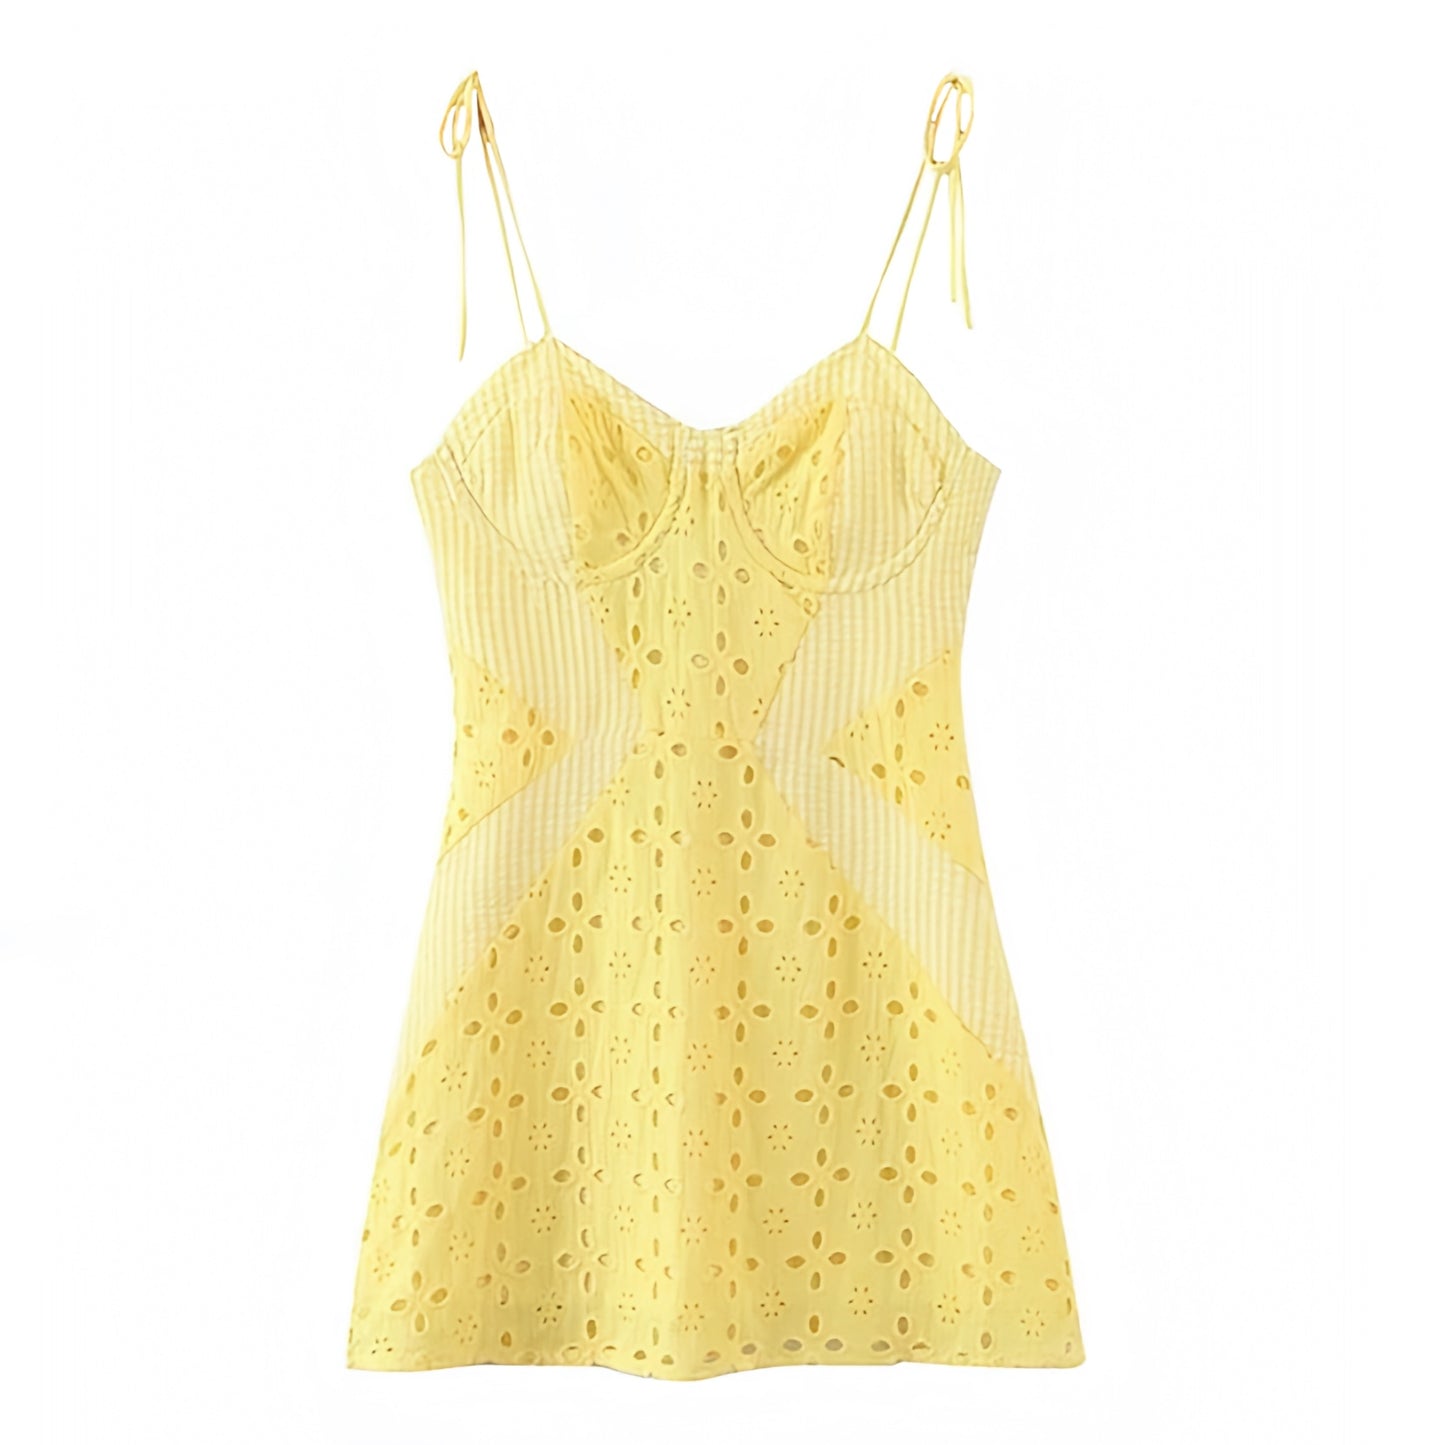 yellow-eyelet-embroidered-broderie-pointelle-striped-gingham-ribbed-shirred-slim-fit-bodycon-corset-bustier-underwire-sweetheart-neckline-spaghetti-strap-sleeveless-backless-open-back-short-mini-dress-women-ladies-teens-tweens-chic-trendy-spring-2024-summer-elegant-casual-semi-formal-feminine-preppy-style-prom-homecoming-hoco-dance-wedding-guest-boho-bohemian-european-tropical-beach-wear-vacation-sundress-dresses-altard-state-zara-revolve-aritzia-urban-outfitters-charo-ruiz-dupe